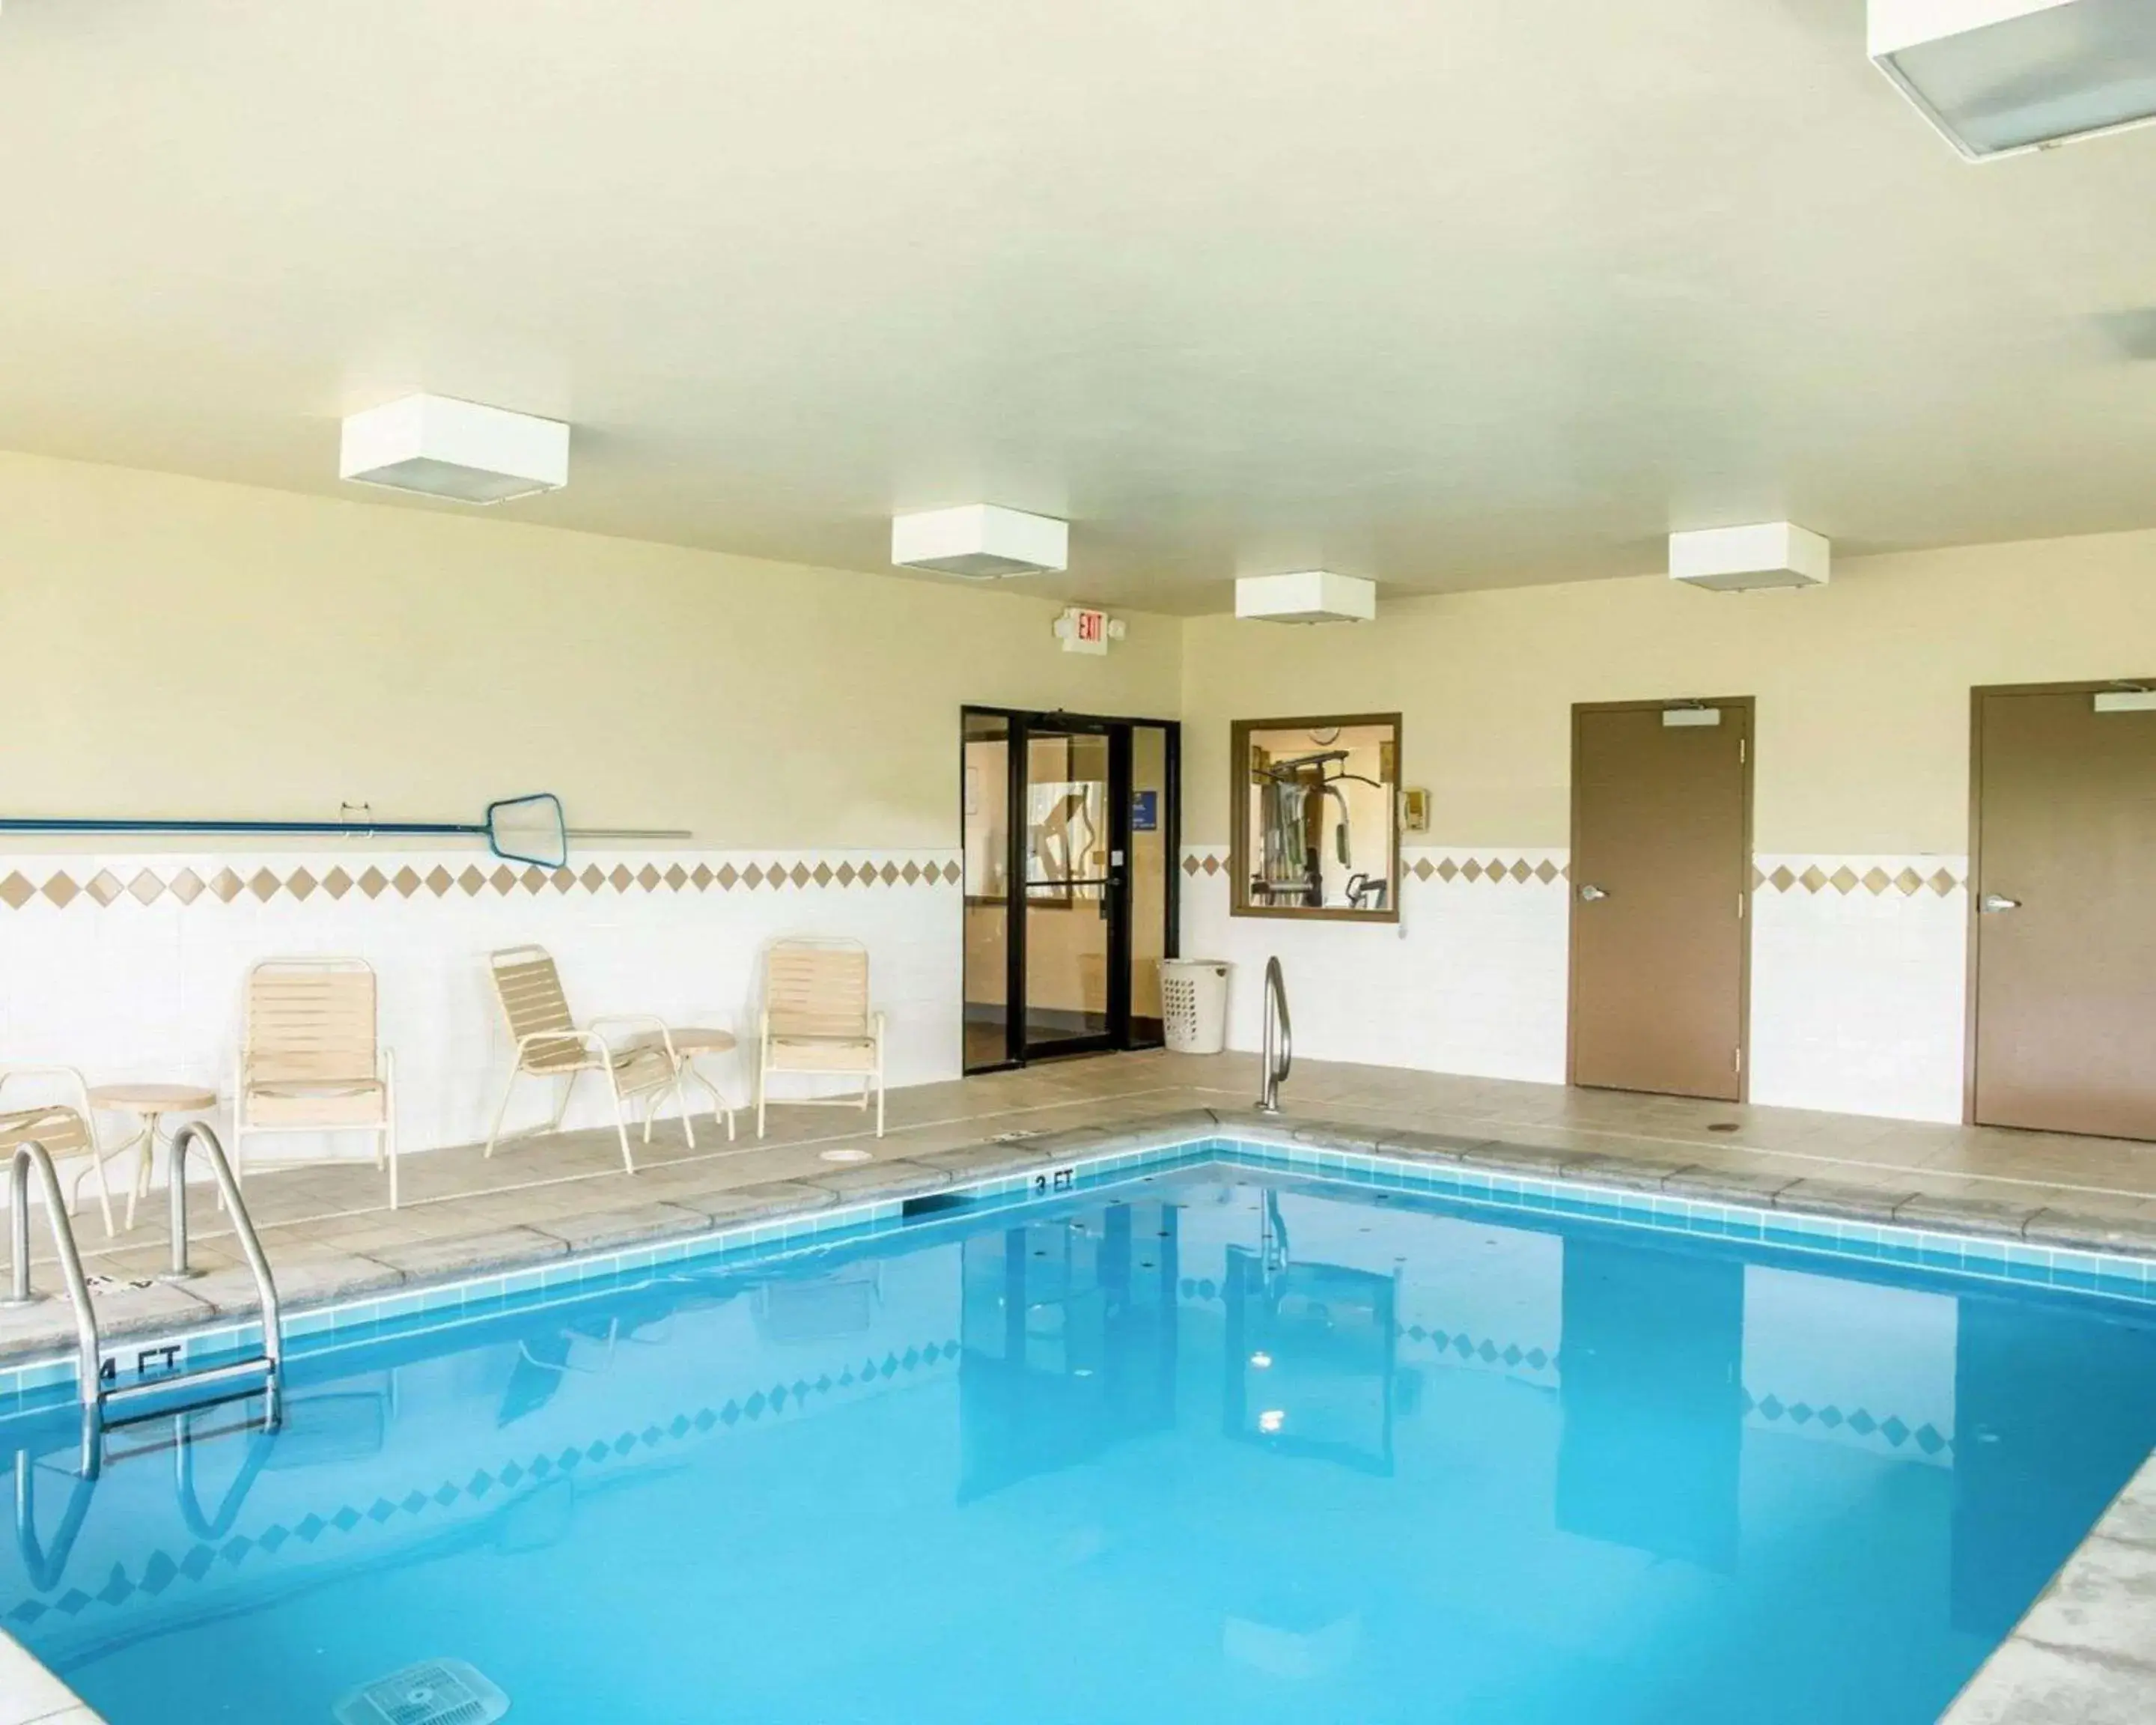 On site, Swimming Pool in Quality Inn Springboro West